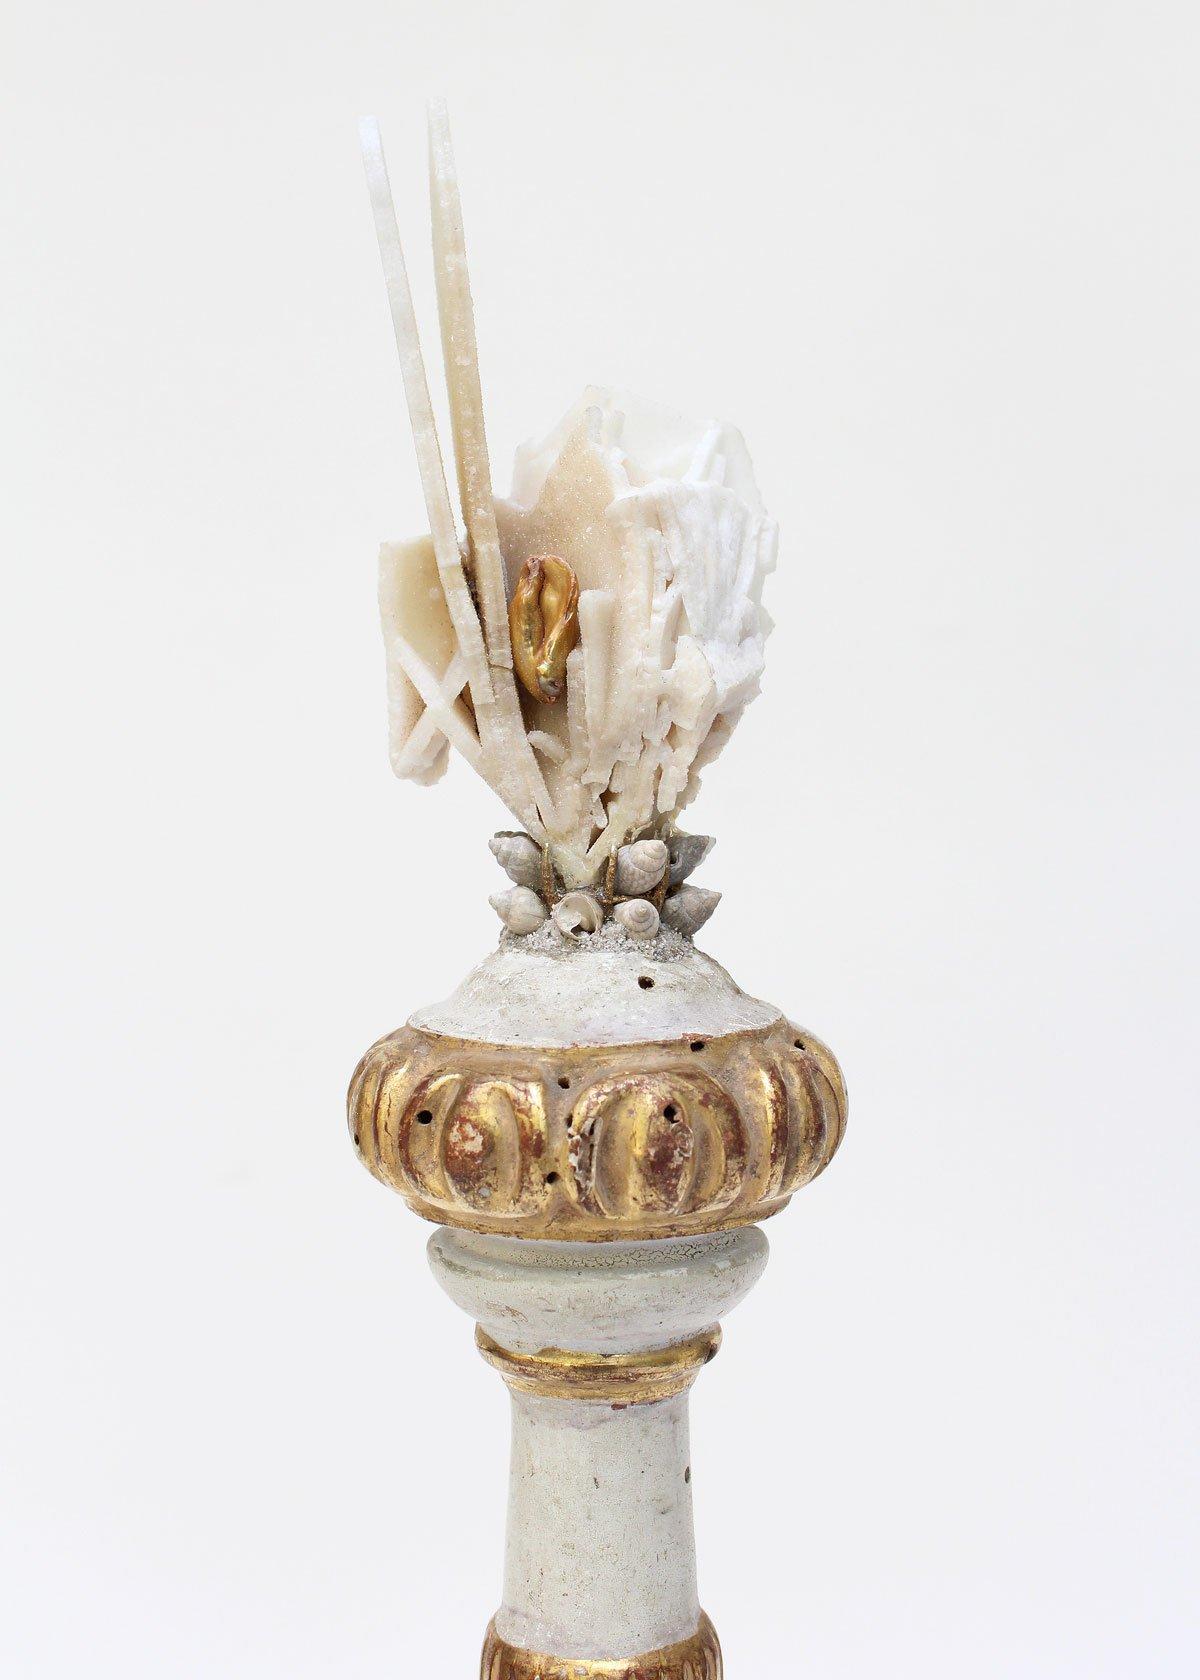 18th century Italian candlestick decorated with angle plated quartz with a baroque pearl and fossil shells on a double polished selenite base. 

Angle-plated quartz is an extremely rare form of quartz and is only found in the upstate region of South